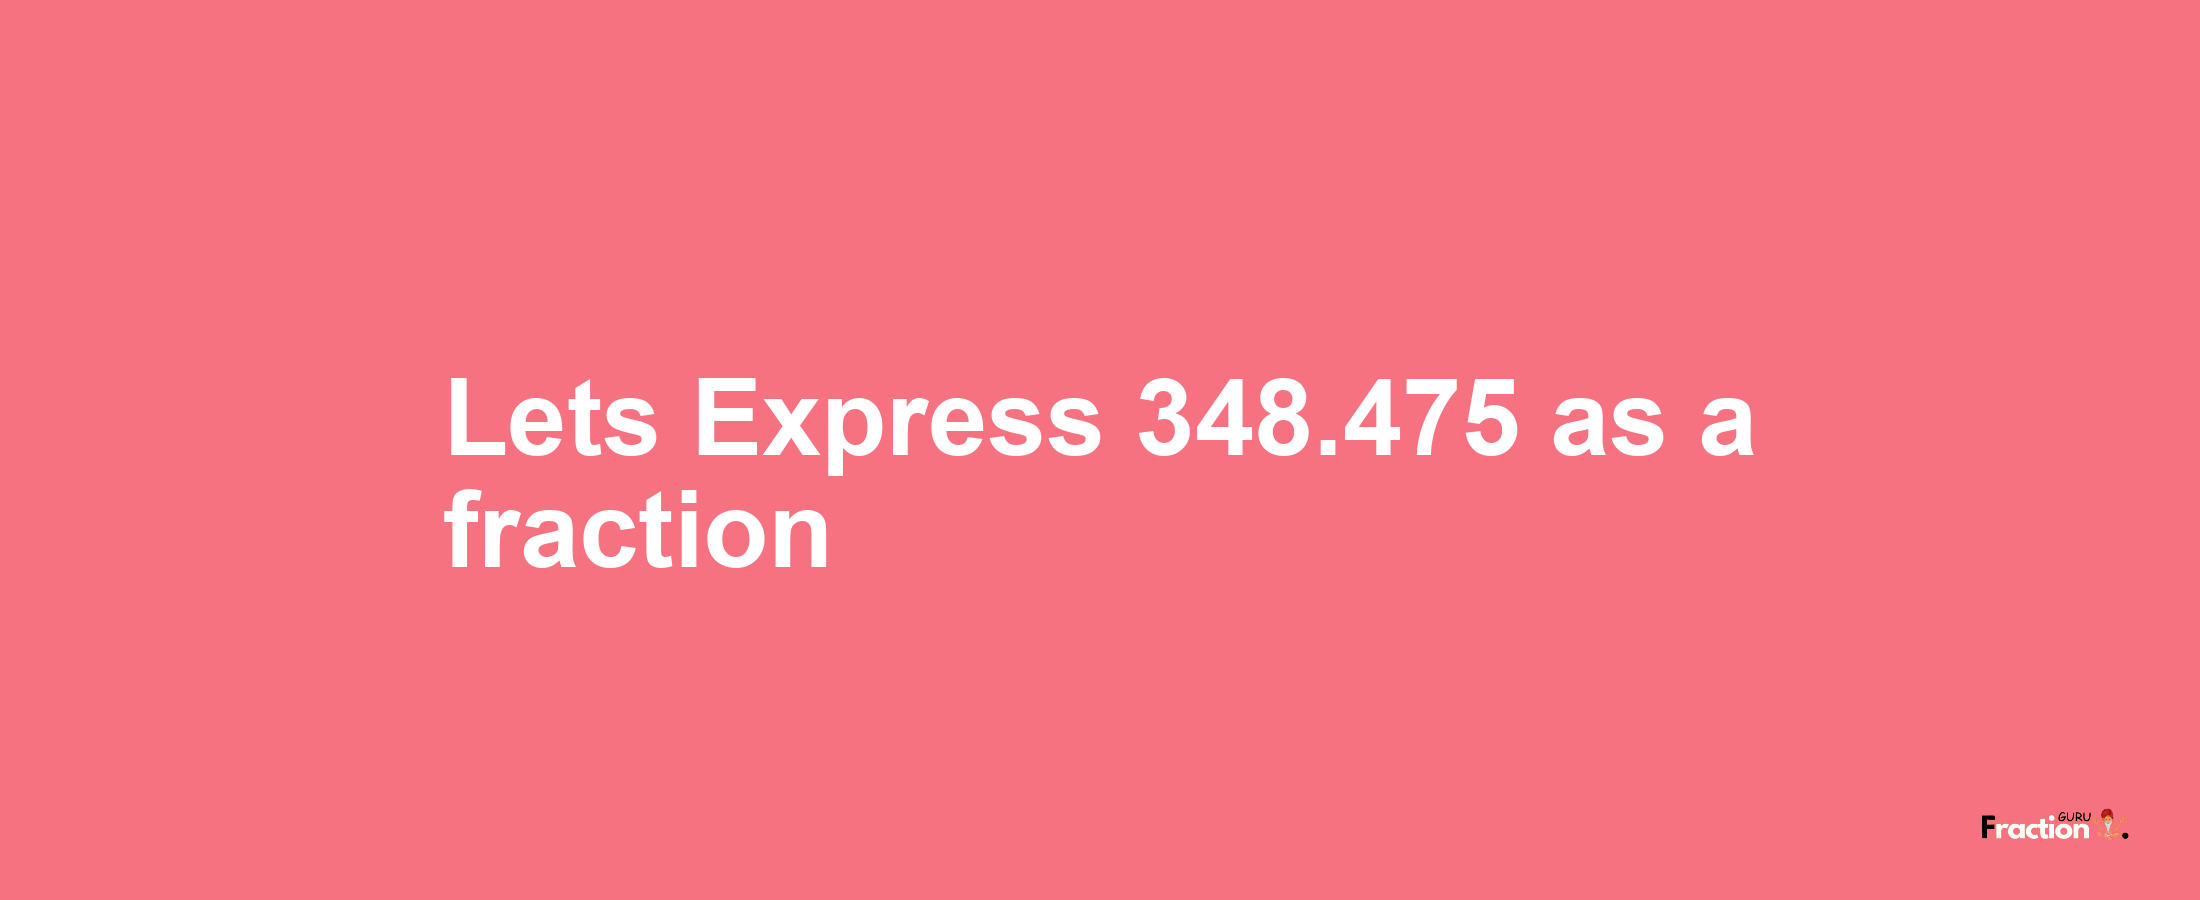 Lets Express 348.475 as afraction